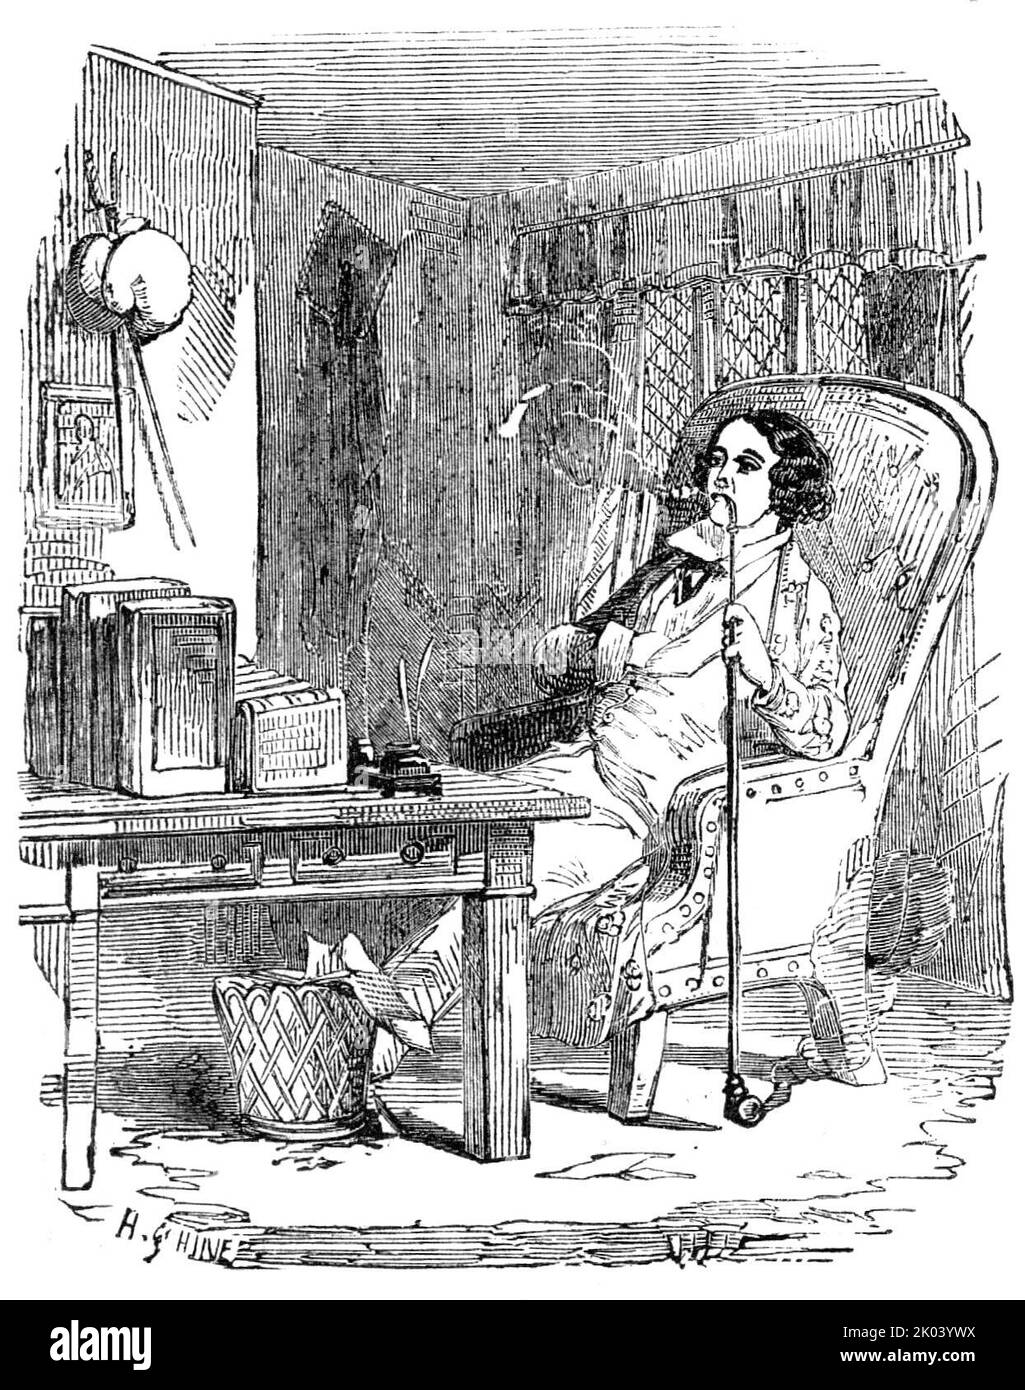 Illustration from &quot;A Long-Vacation Vigil&quot; by Cuthbert Bede, B.A., 1854. Young man smoking a very long pipe. 'I had been anxiously looking forward to the Long Vacation, for the end of it would see me going in for my degree...I went so far as to unpack my books and lay them upon my study-table; but the exertion seemed to exercise a weakening effect upon me'. From &quot;Illustrated London News&quot;, 1854. Stock Photo